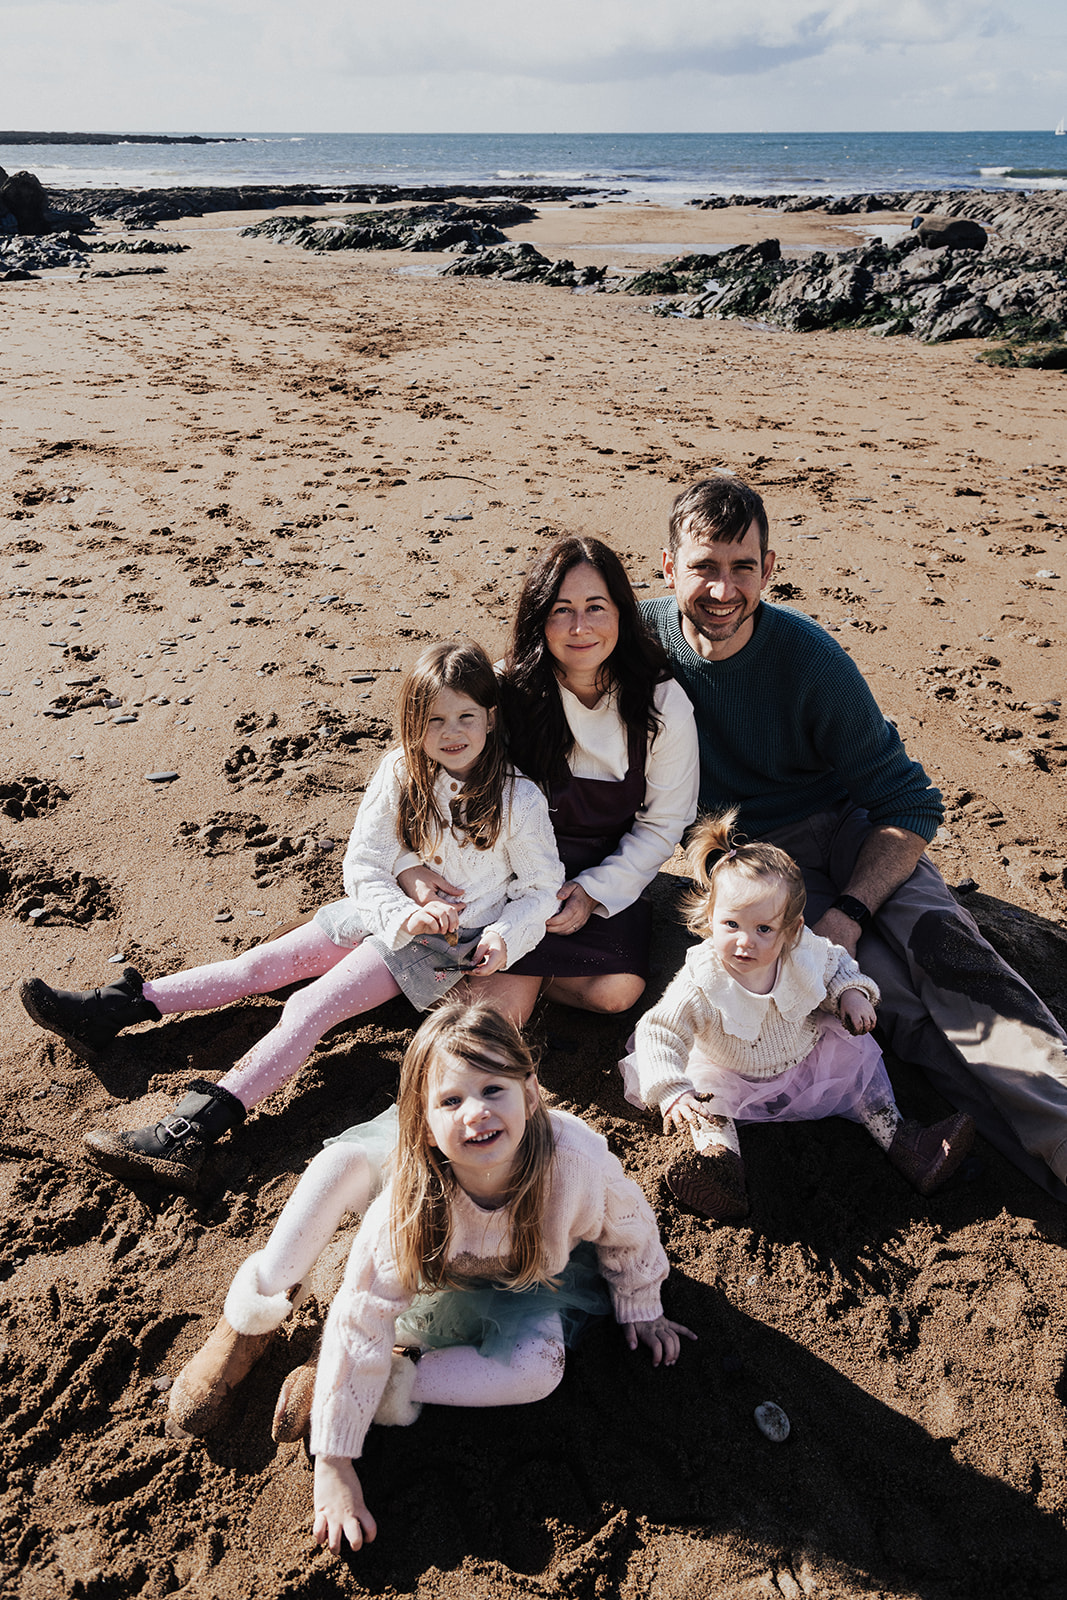 Candid family photography at Bovisand beach in Devon